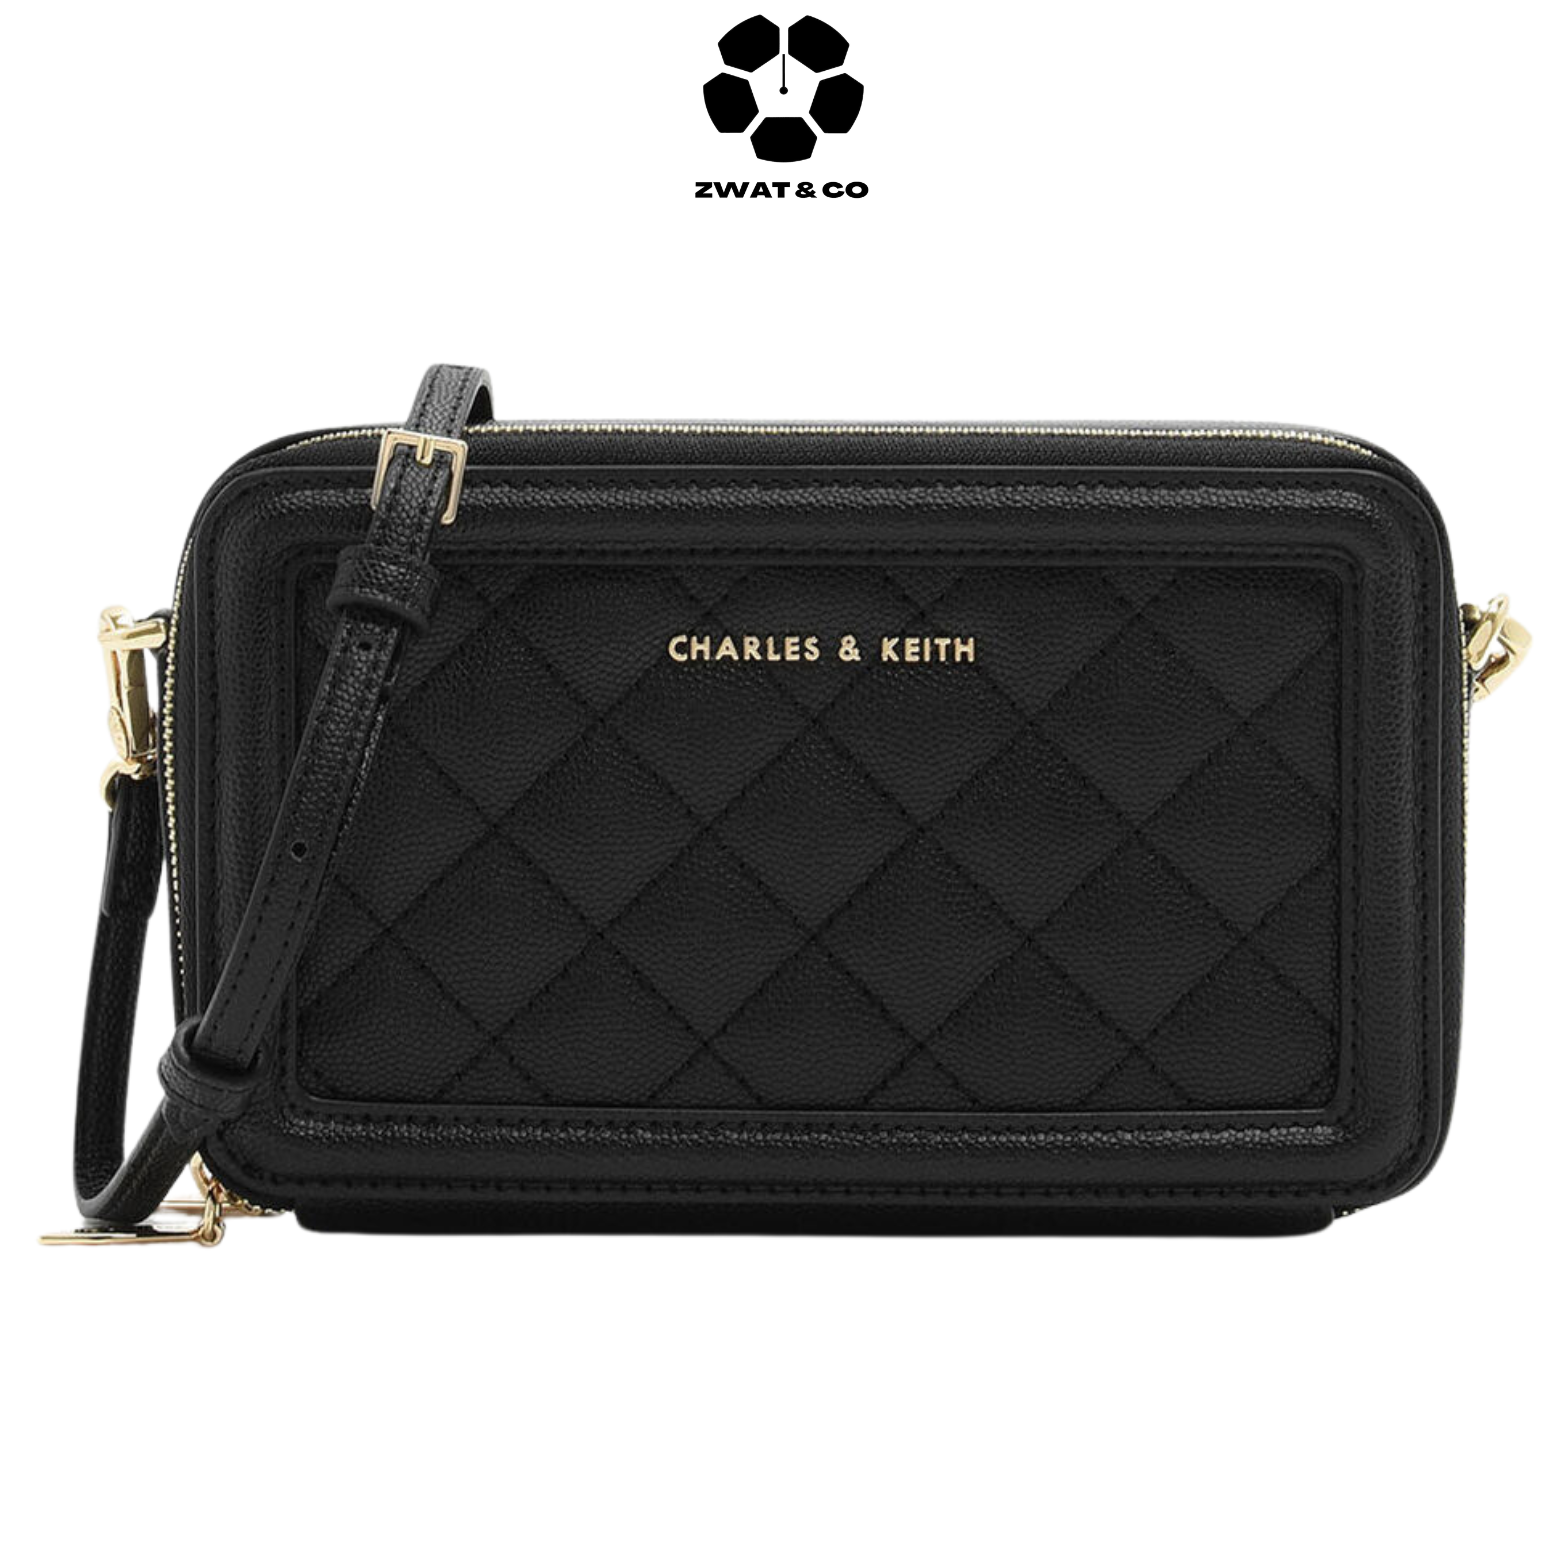 Black Quilted Boxy Long Wallet, CHARLES & KEITH